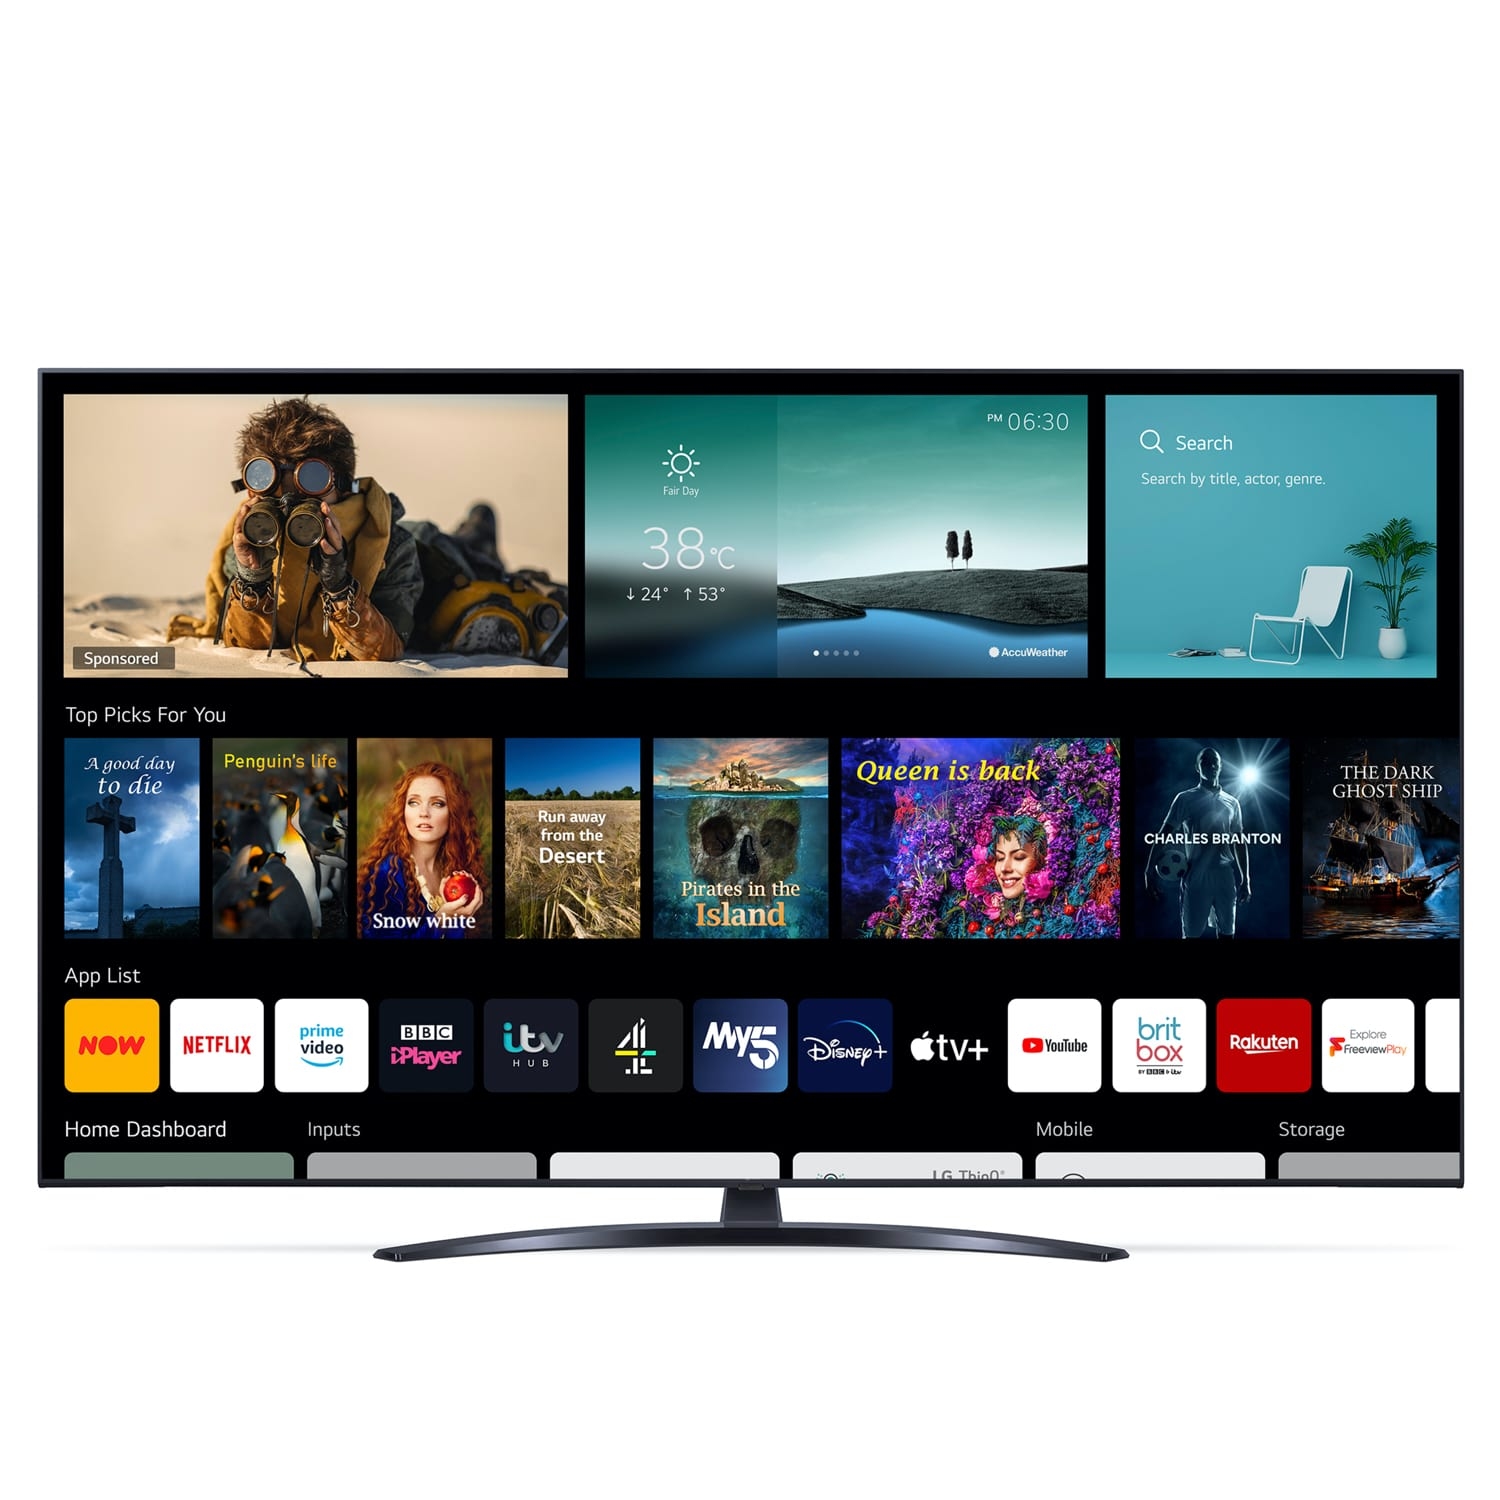 LG 55UP81006LA 55" 4K Ultra HD LED Smart TV with Freeview Play Freesat HD & Voice Assistants - 0